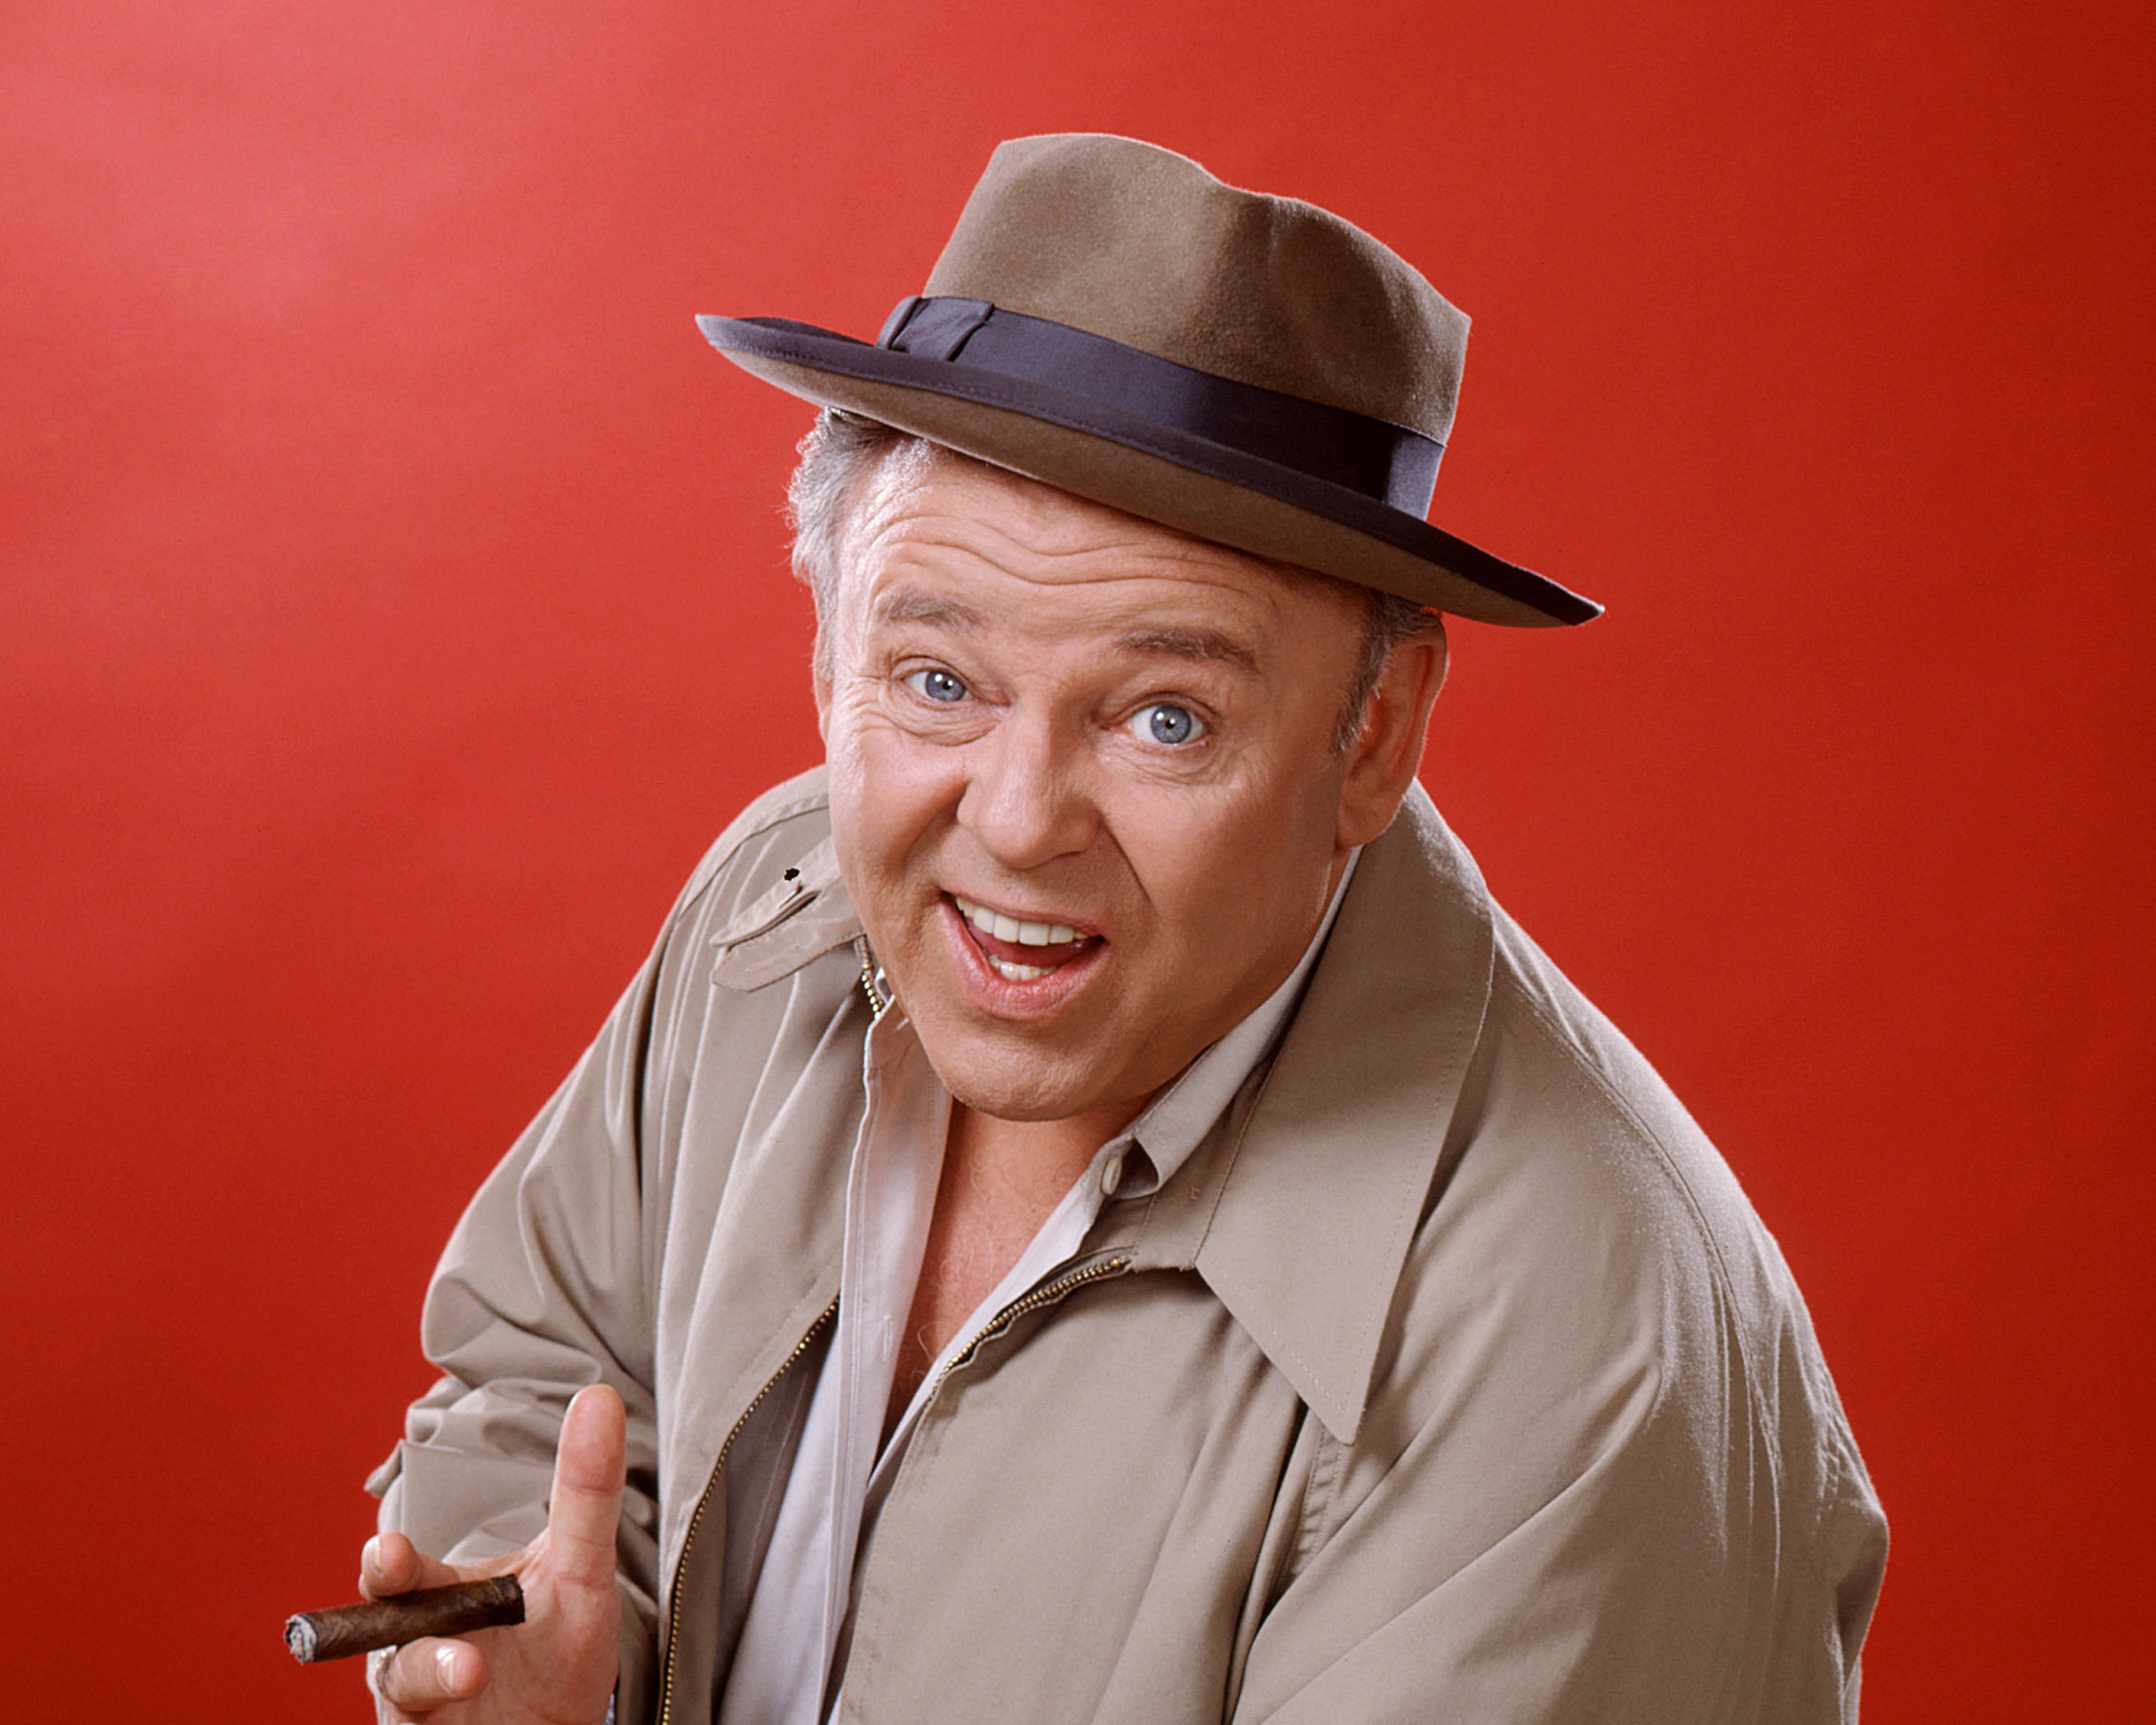 Studio portrait of Carroll O'Connor wearing a brown hat with a beige jacket and holding a cigar